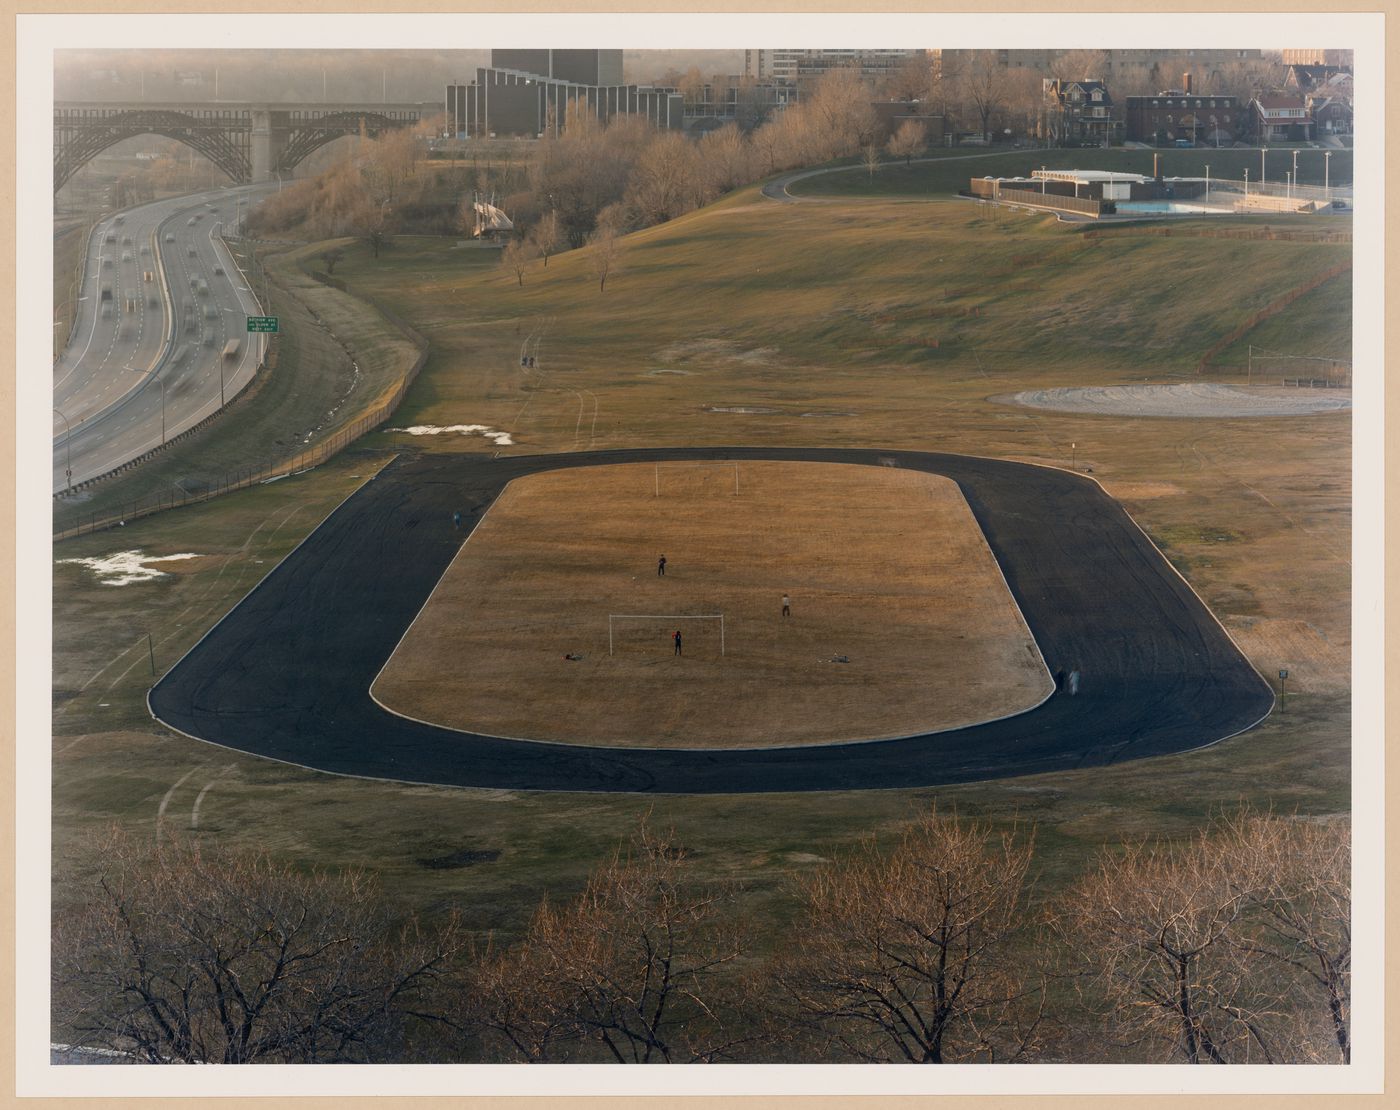 Don Valley: view of playing field of Riverdale Park next to Don Valley Parkway, Toronto, Ontario